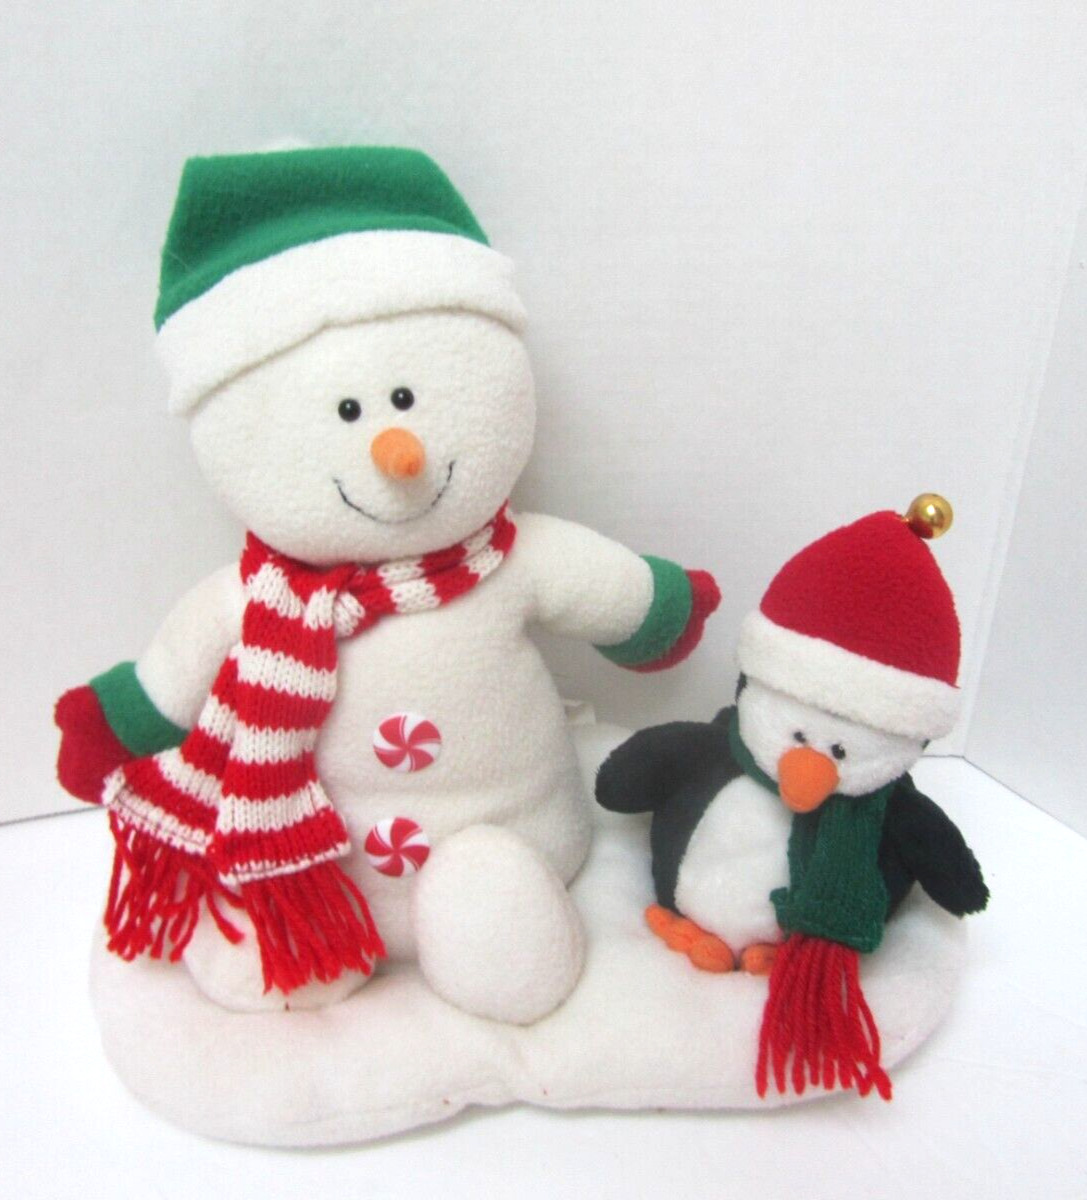 2005 Jo-Ann Stores Musical Snowman Penguin Animated Plush SEE VIDEO